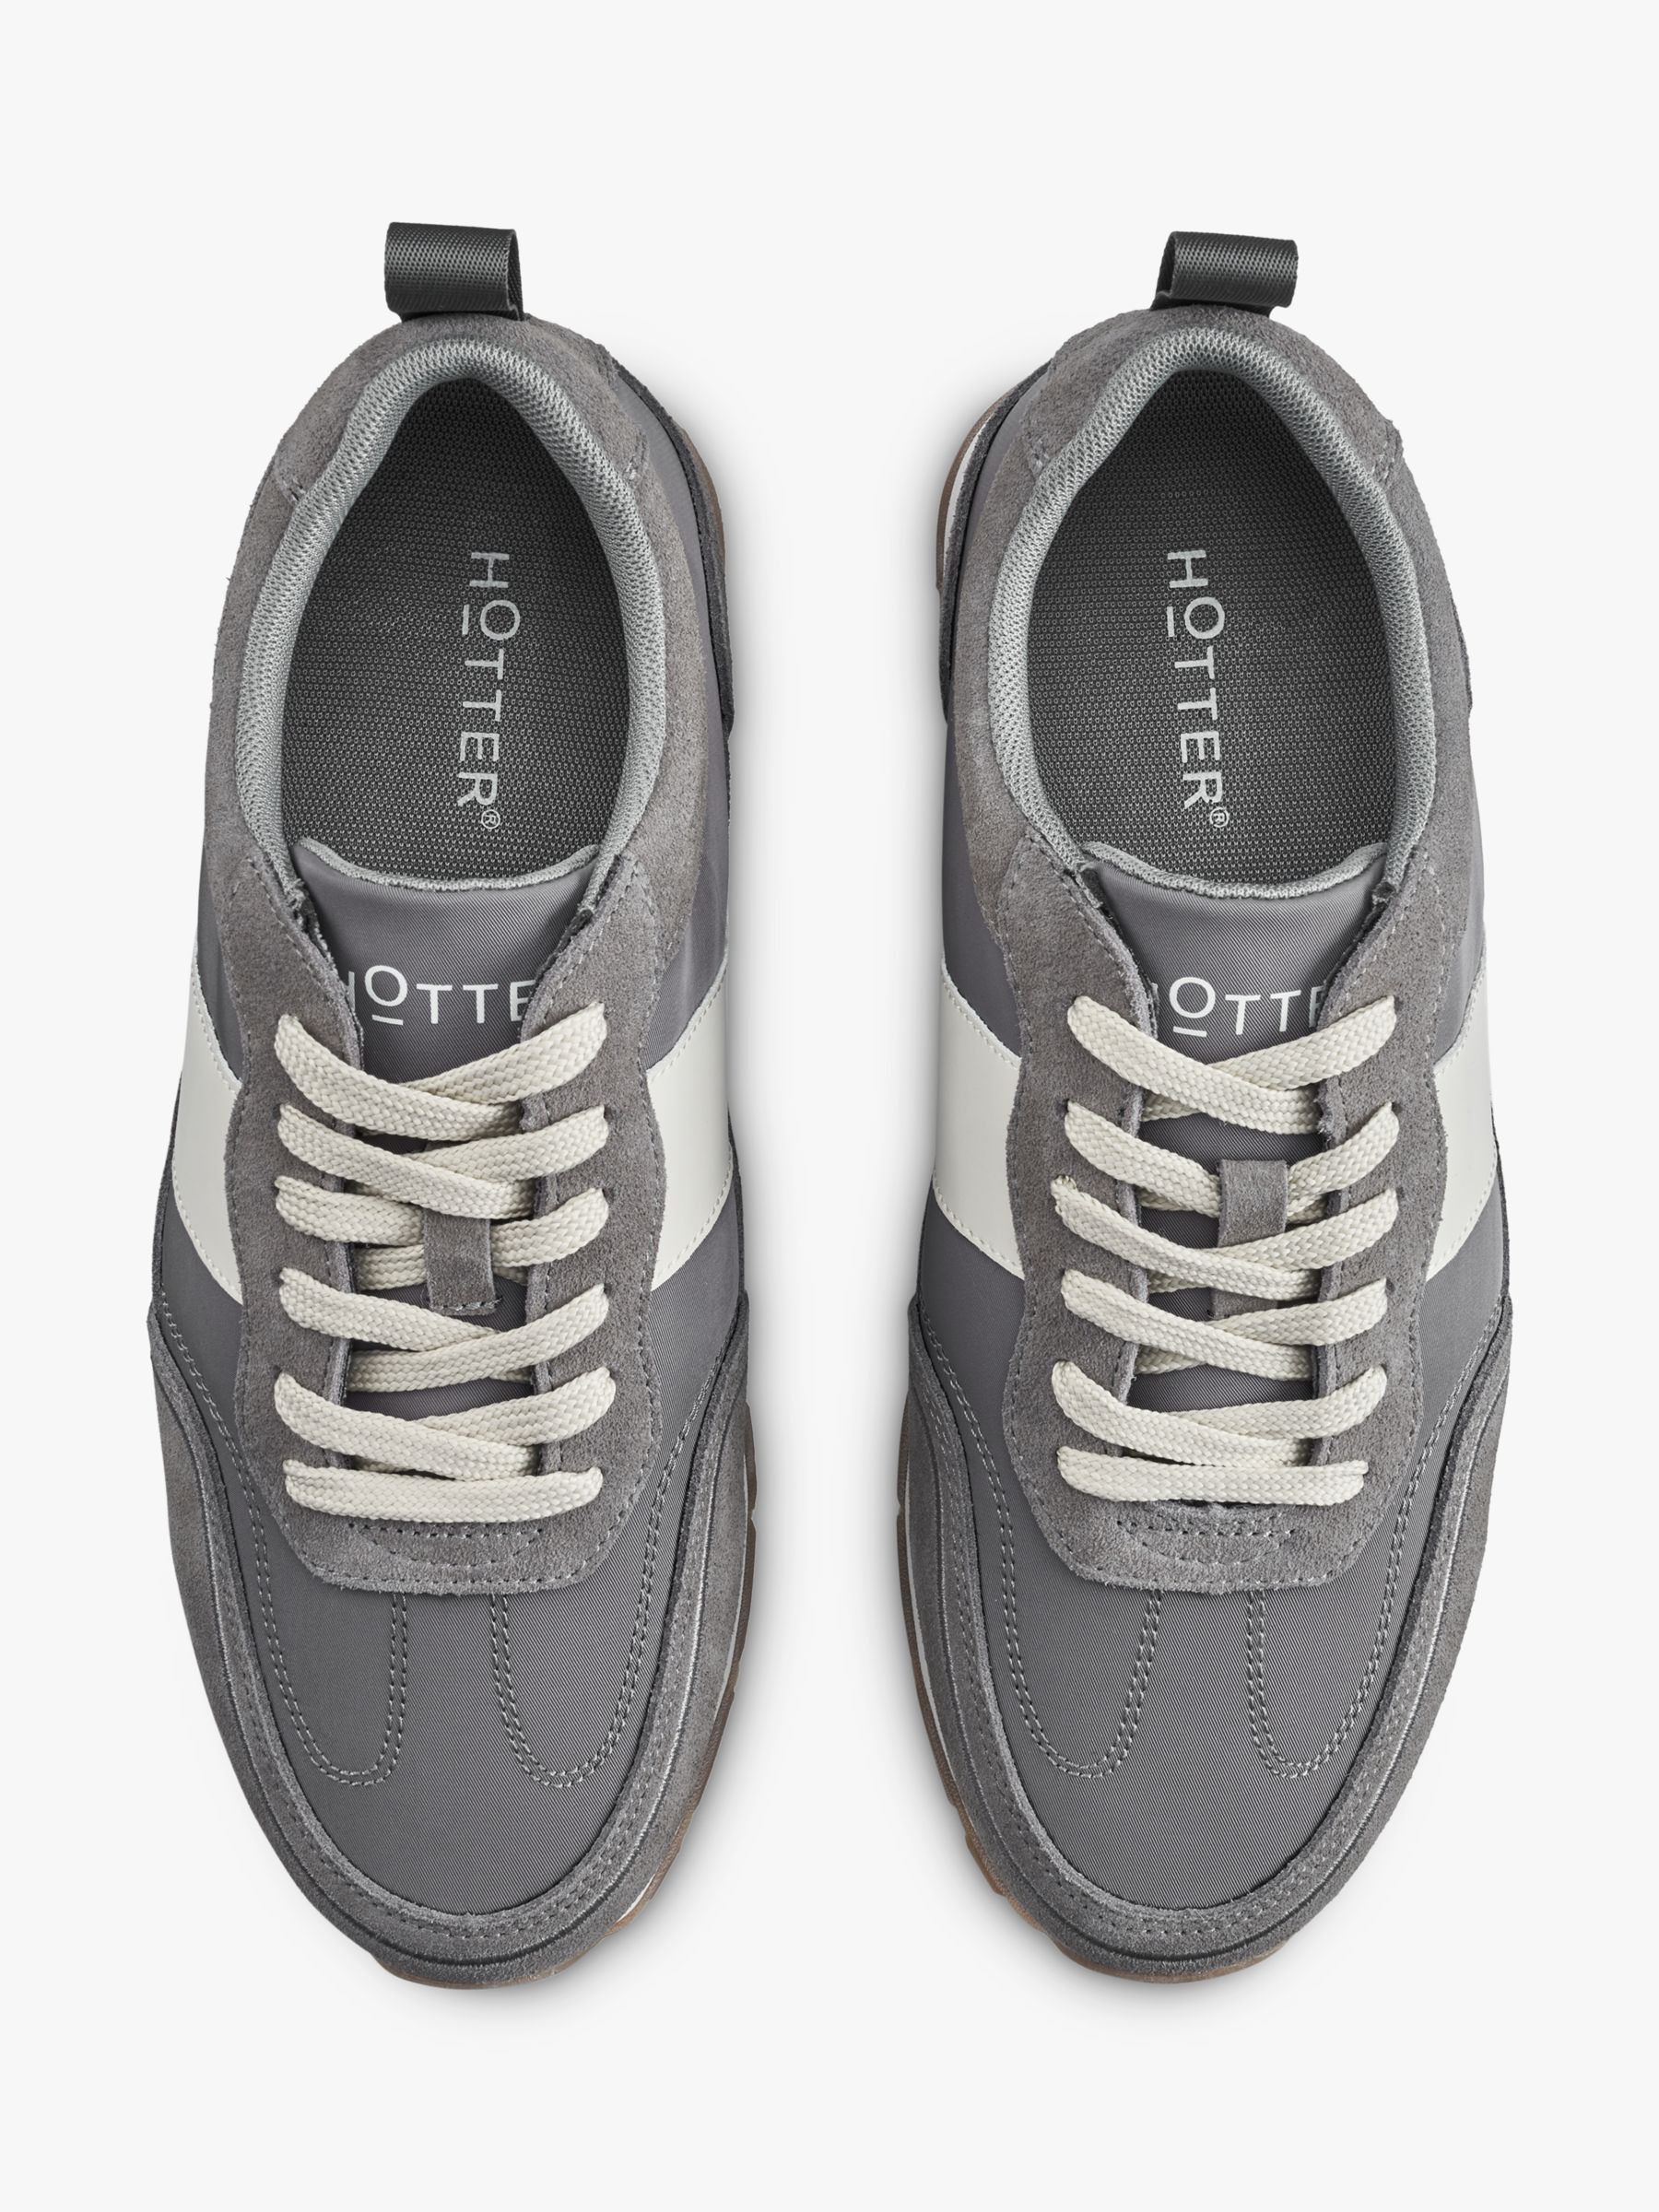 Buy Hotter Swerve Retro Inspired Trainers Online at johnlewis.com